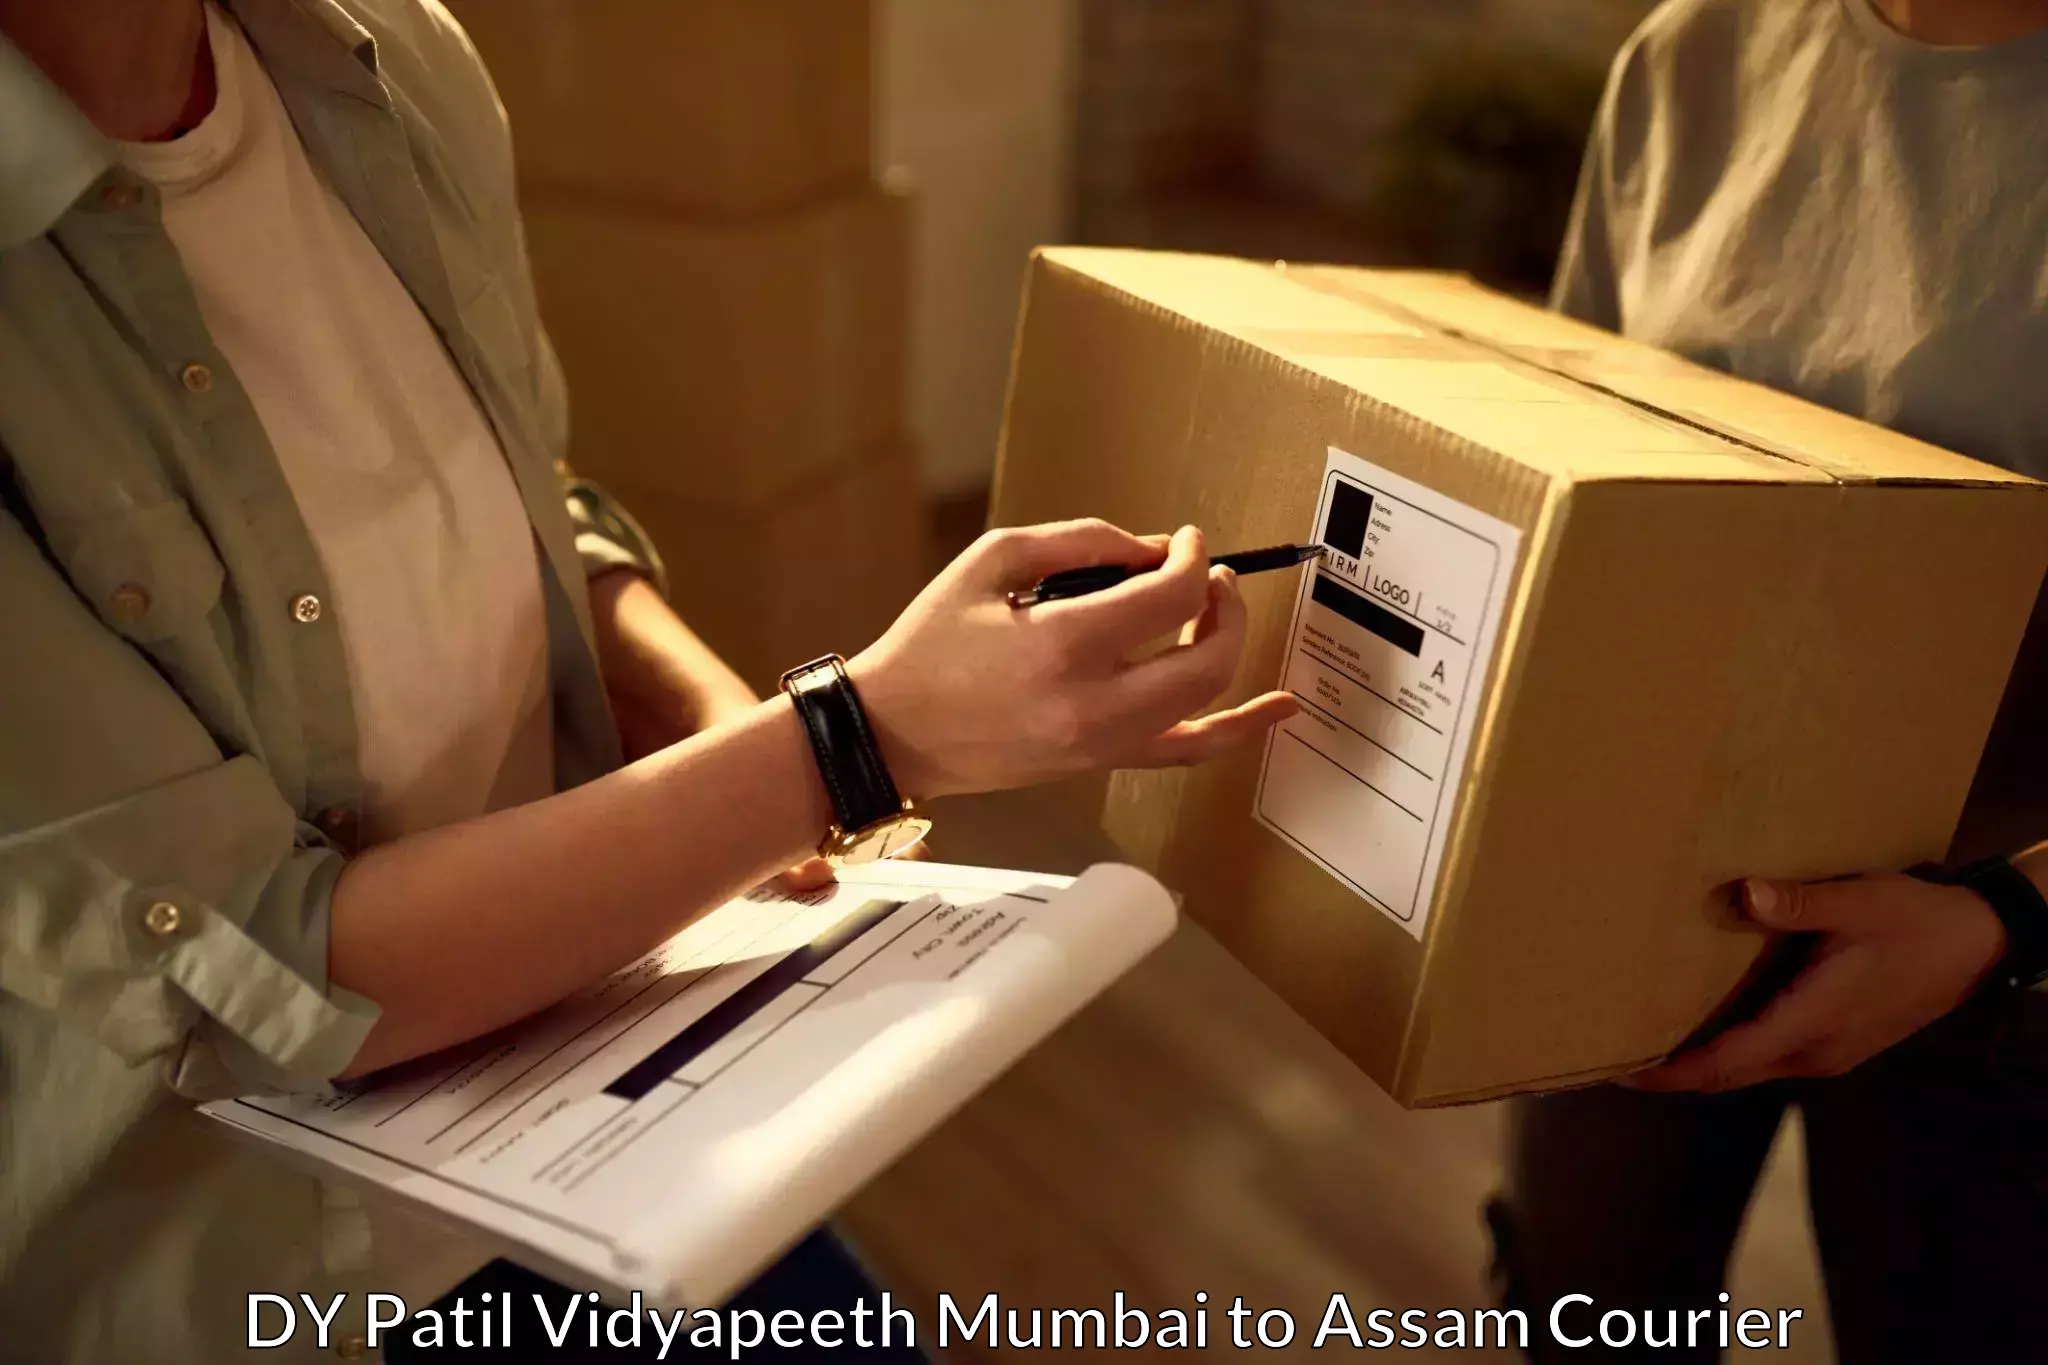 24/7 courier service in DY Patil Vidyapeeth Mumbai to Bhaga